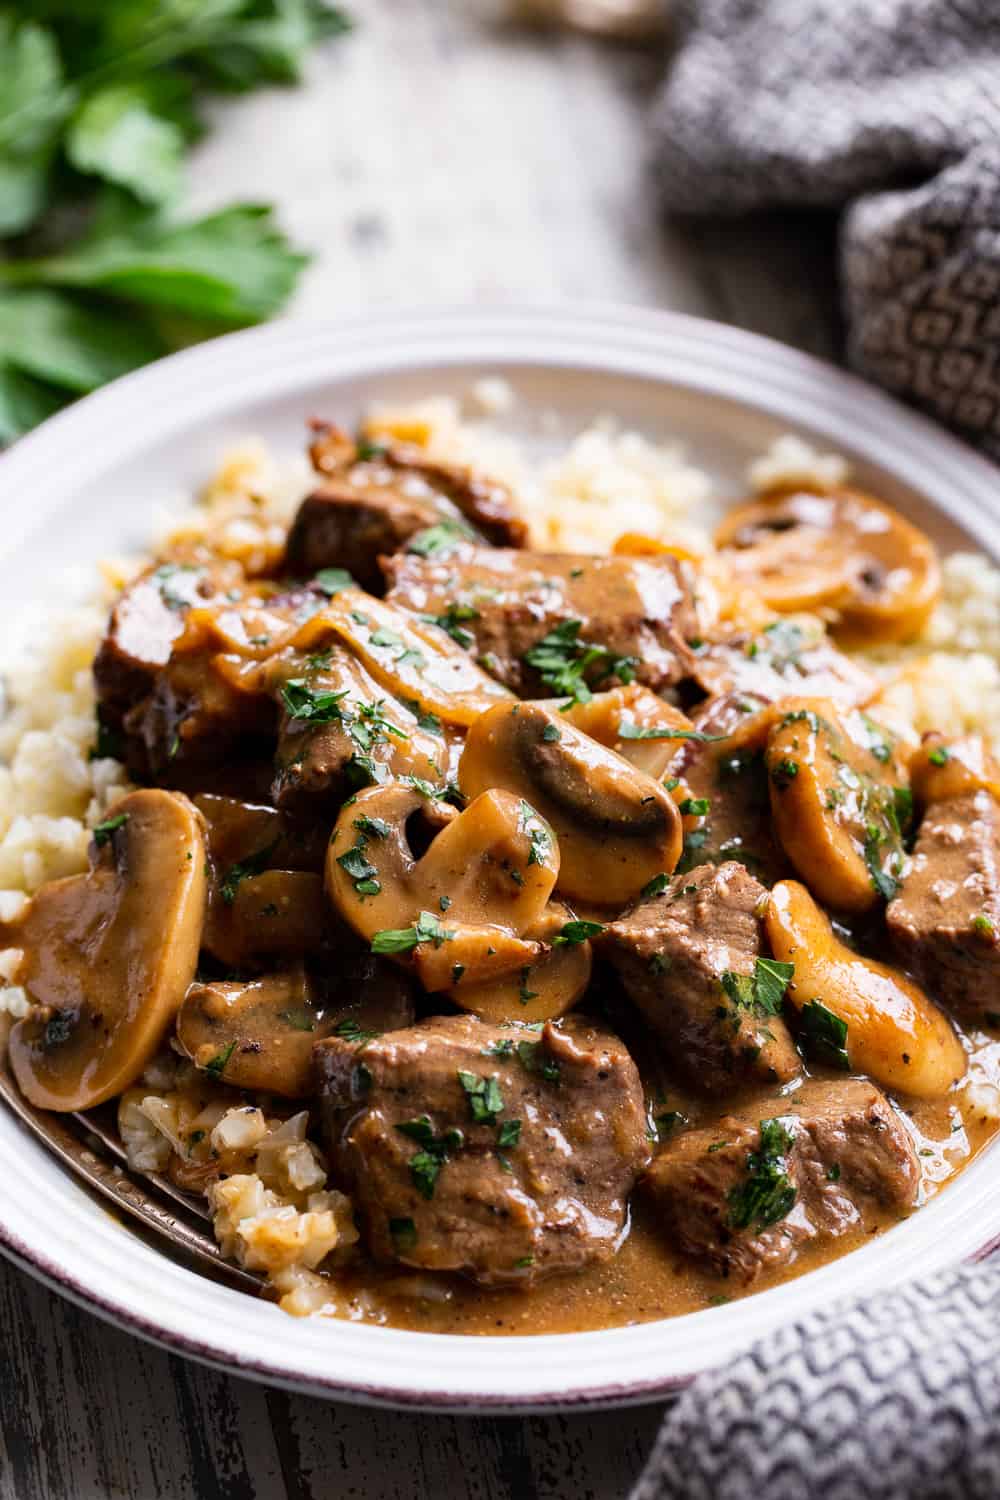 This hearty and savory paleo beef stroganoff is made all in one skillet for a quick, delicious and cozy weeknight meal.  It’s Whole30 compliant, low carb and keto and perfect served over sautéed cauliflower rice or your favorite veggie noodles! #paleo #whole30 #cleaneating #keto #lowcarb